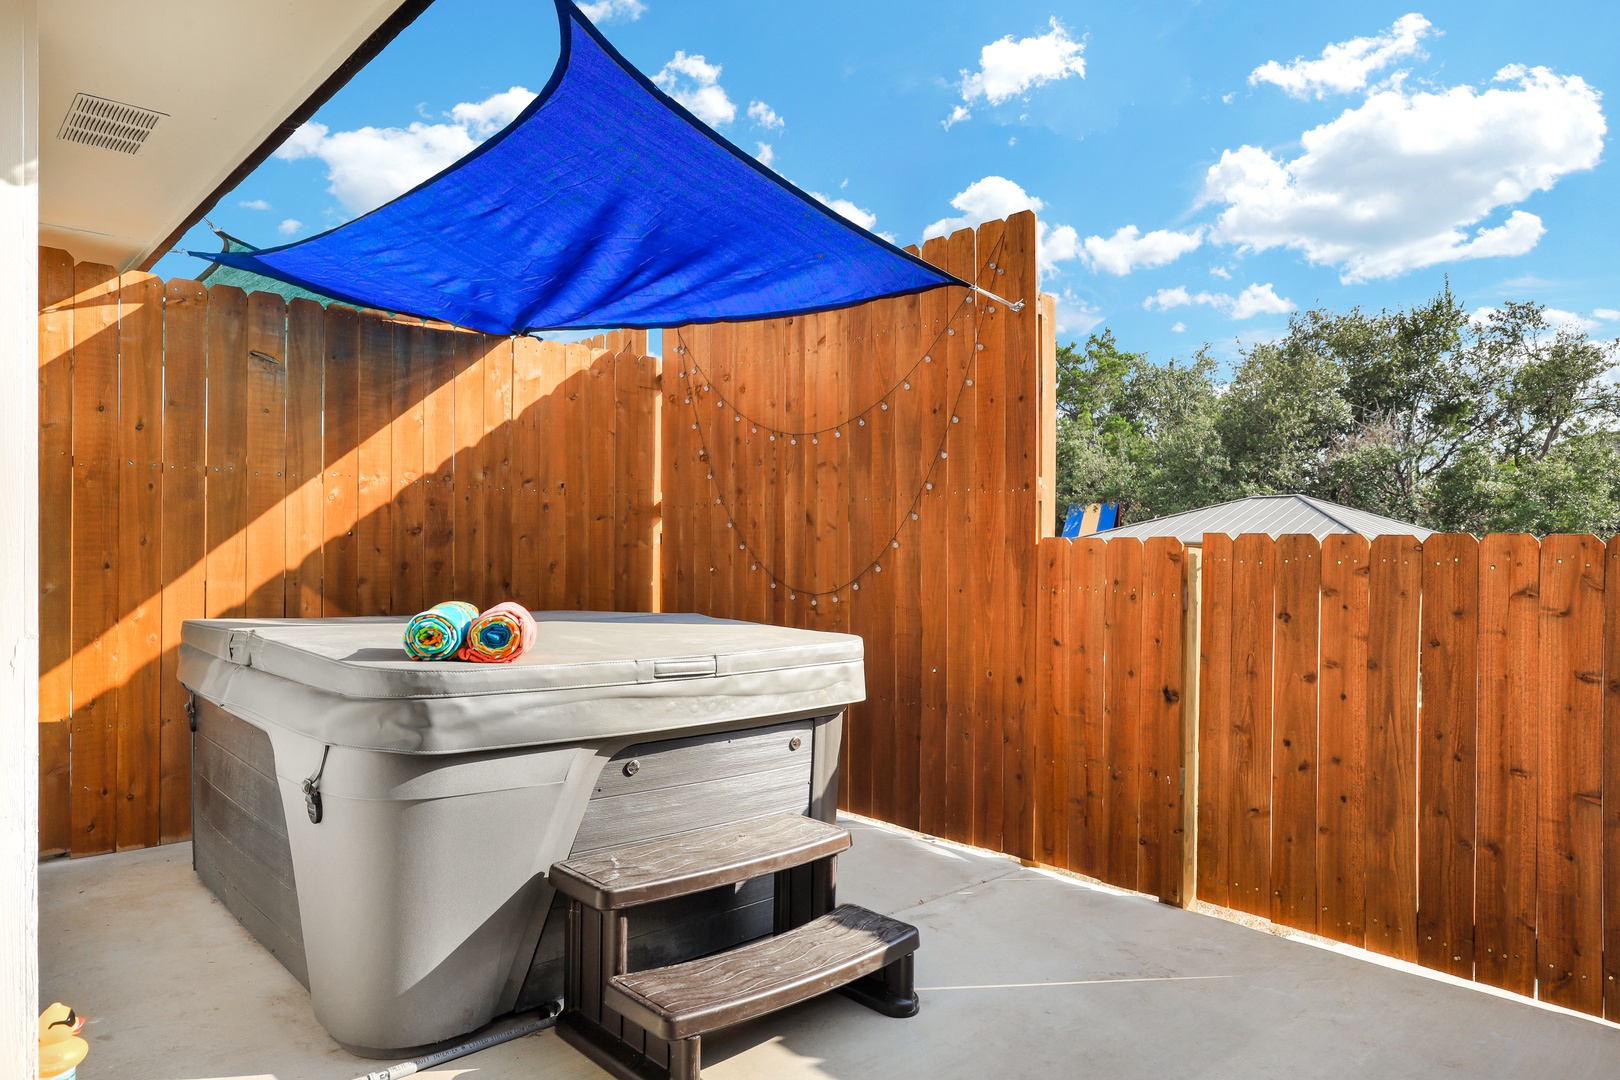 Soak your cares away on the secluded patio in your very own private hot tub